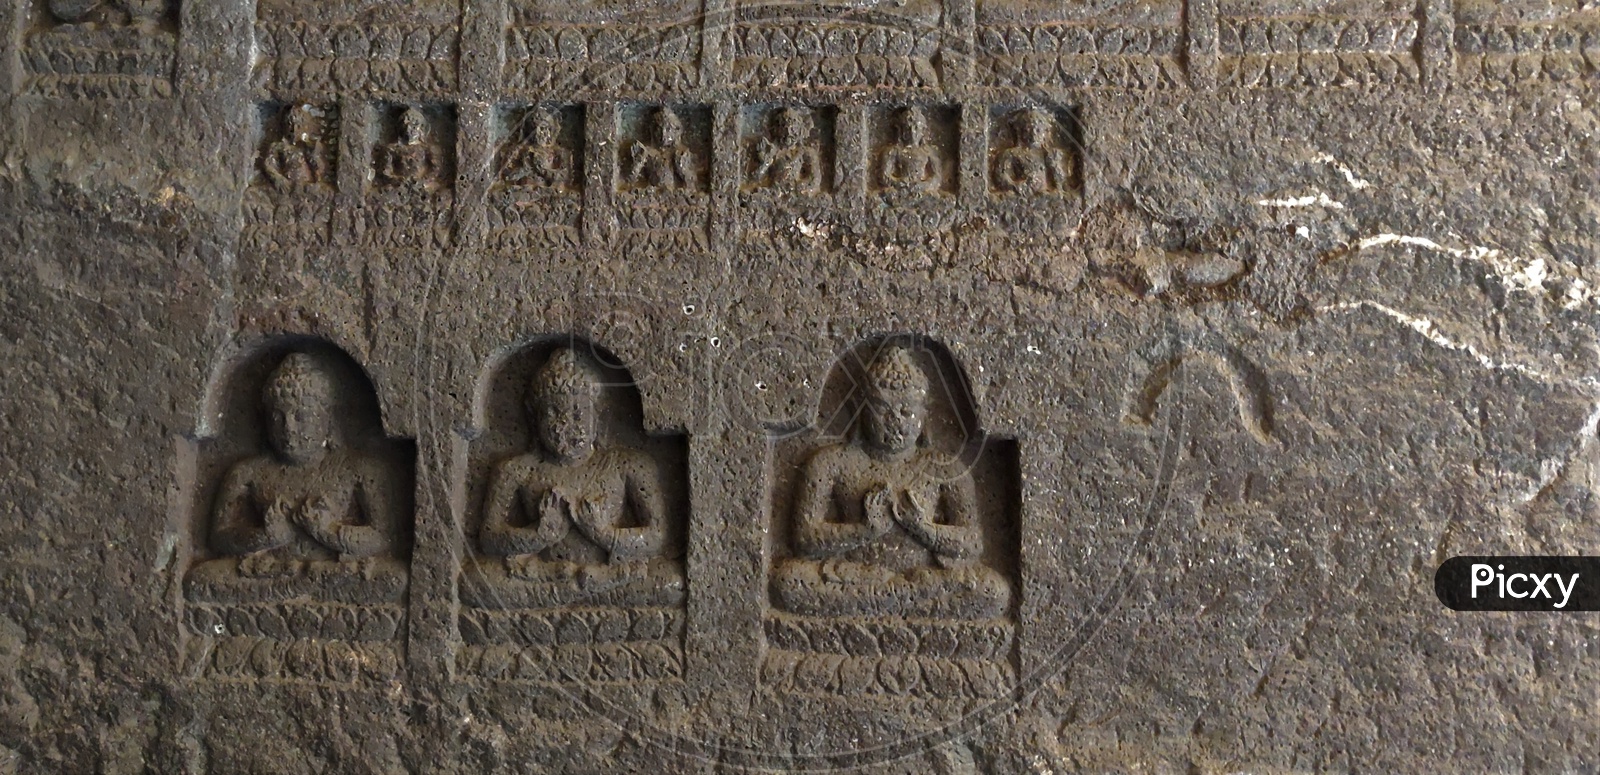 Stone Carvings or sculptures Of Buddha Statues At Ajanta Caves